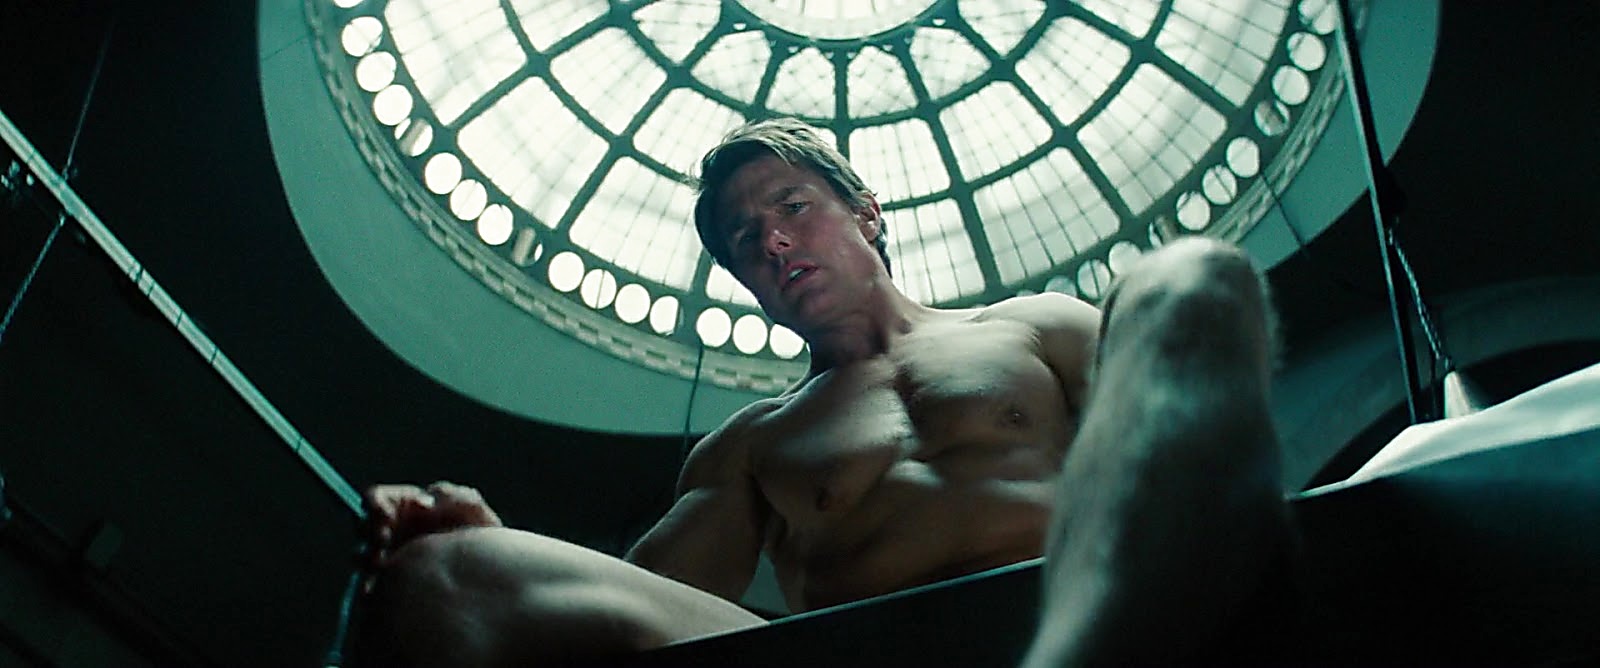 Tom Cruise sexy shirtless scene August 5, 2017, 11am